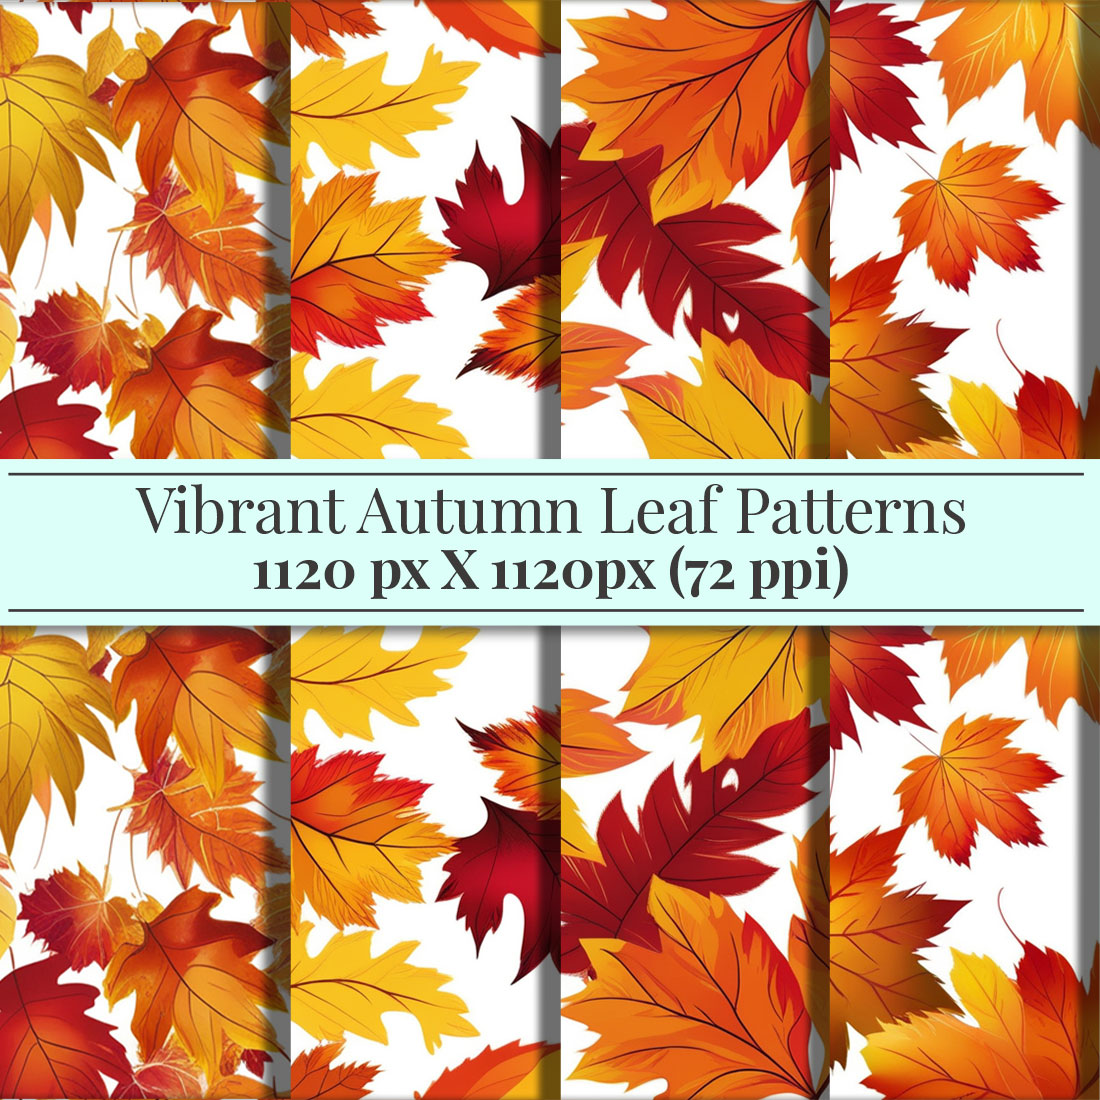 Intricate Autumn Leaf Patterns Digital Paper Bundle - Seamless Fall Leaves in Rich Earthy Tones cover image.